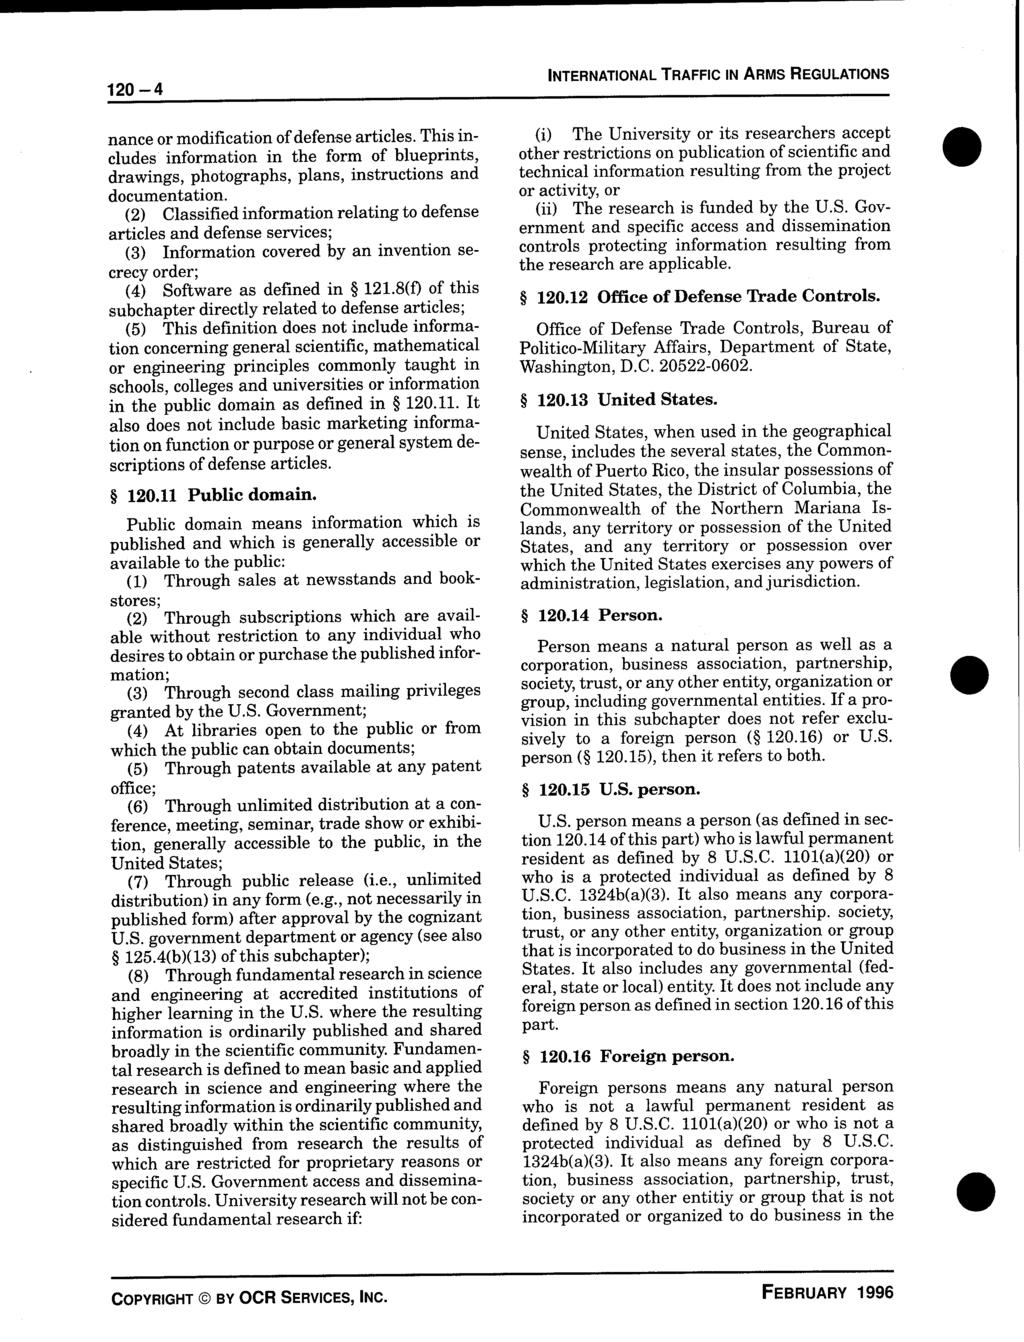 120-4 nance or modification of defense articles. This includes information in the form of blueprints, drawings, photographs, plans, instructions and documentation.